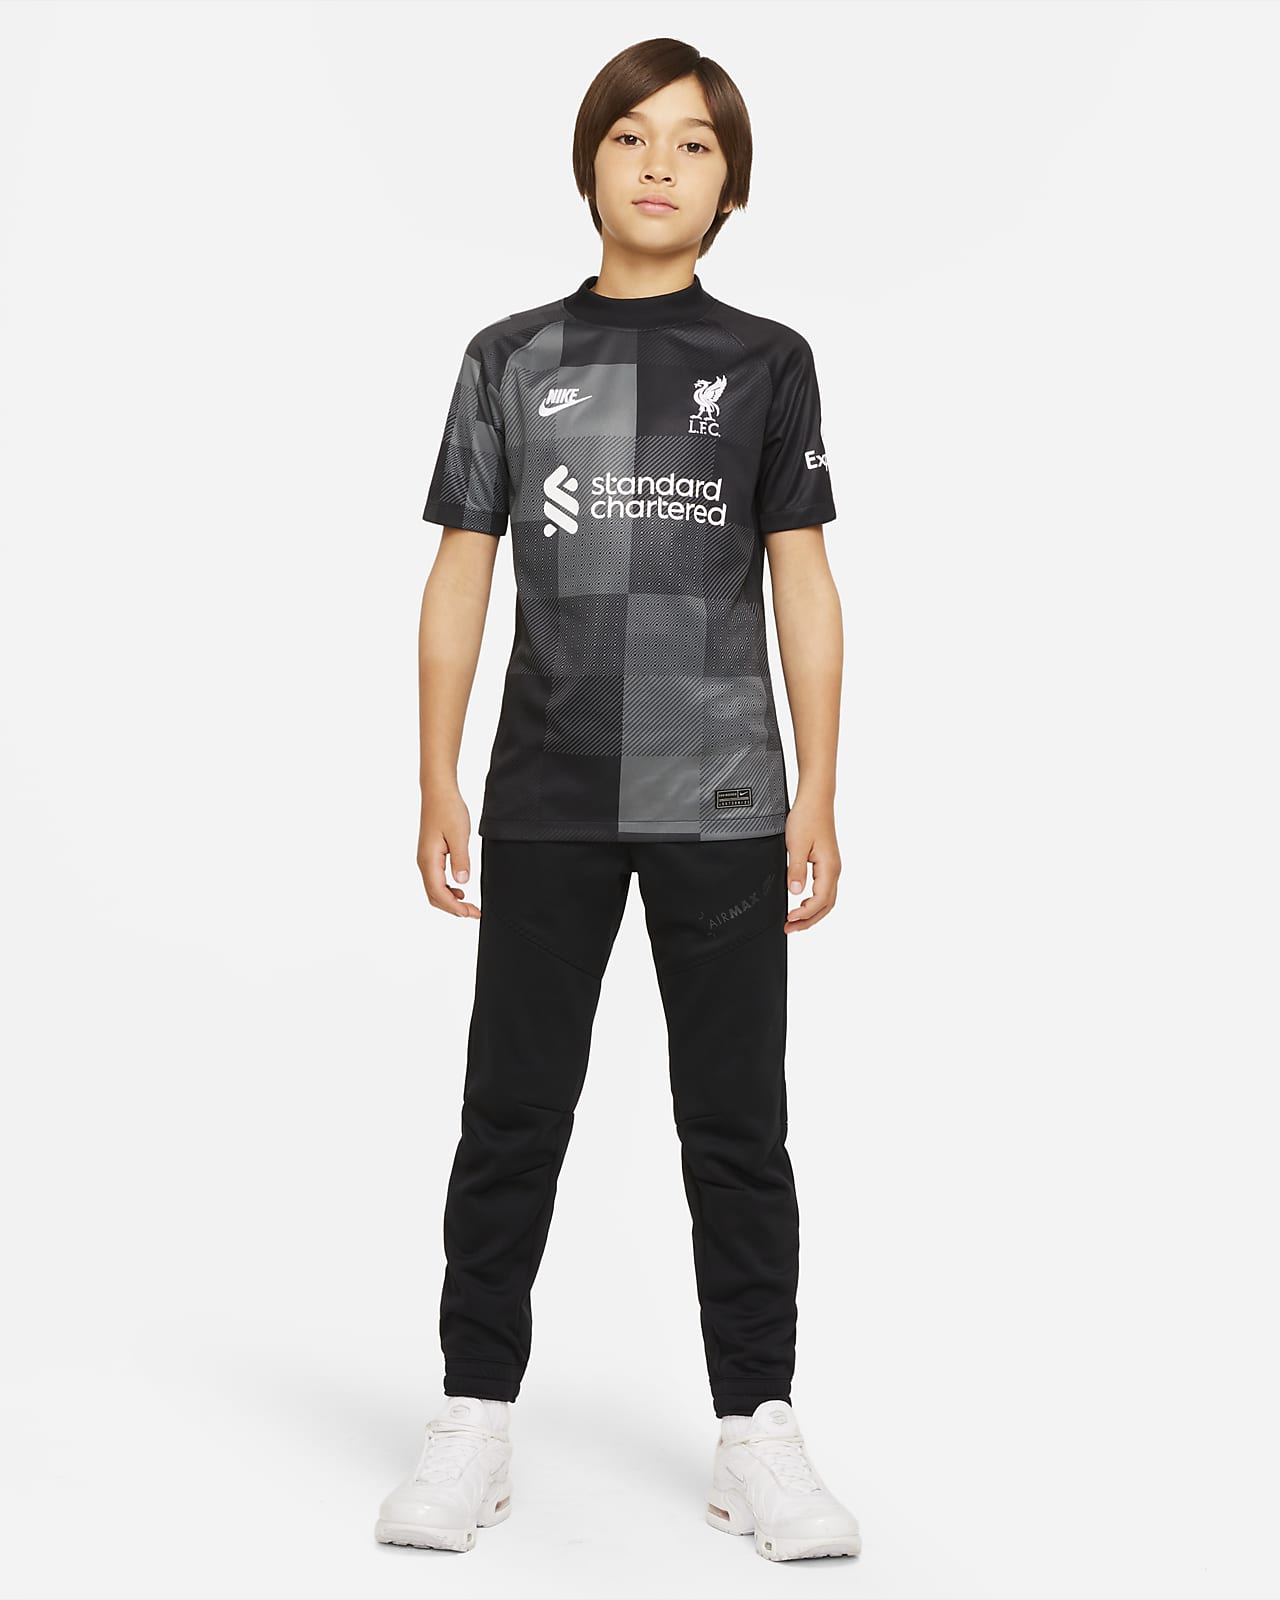 liverpool black out kit